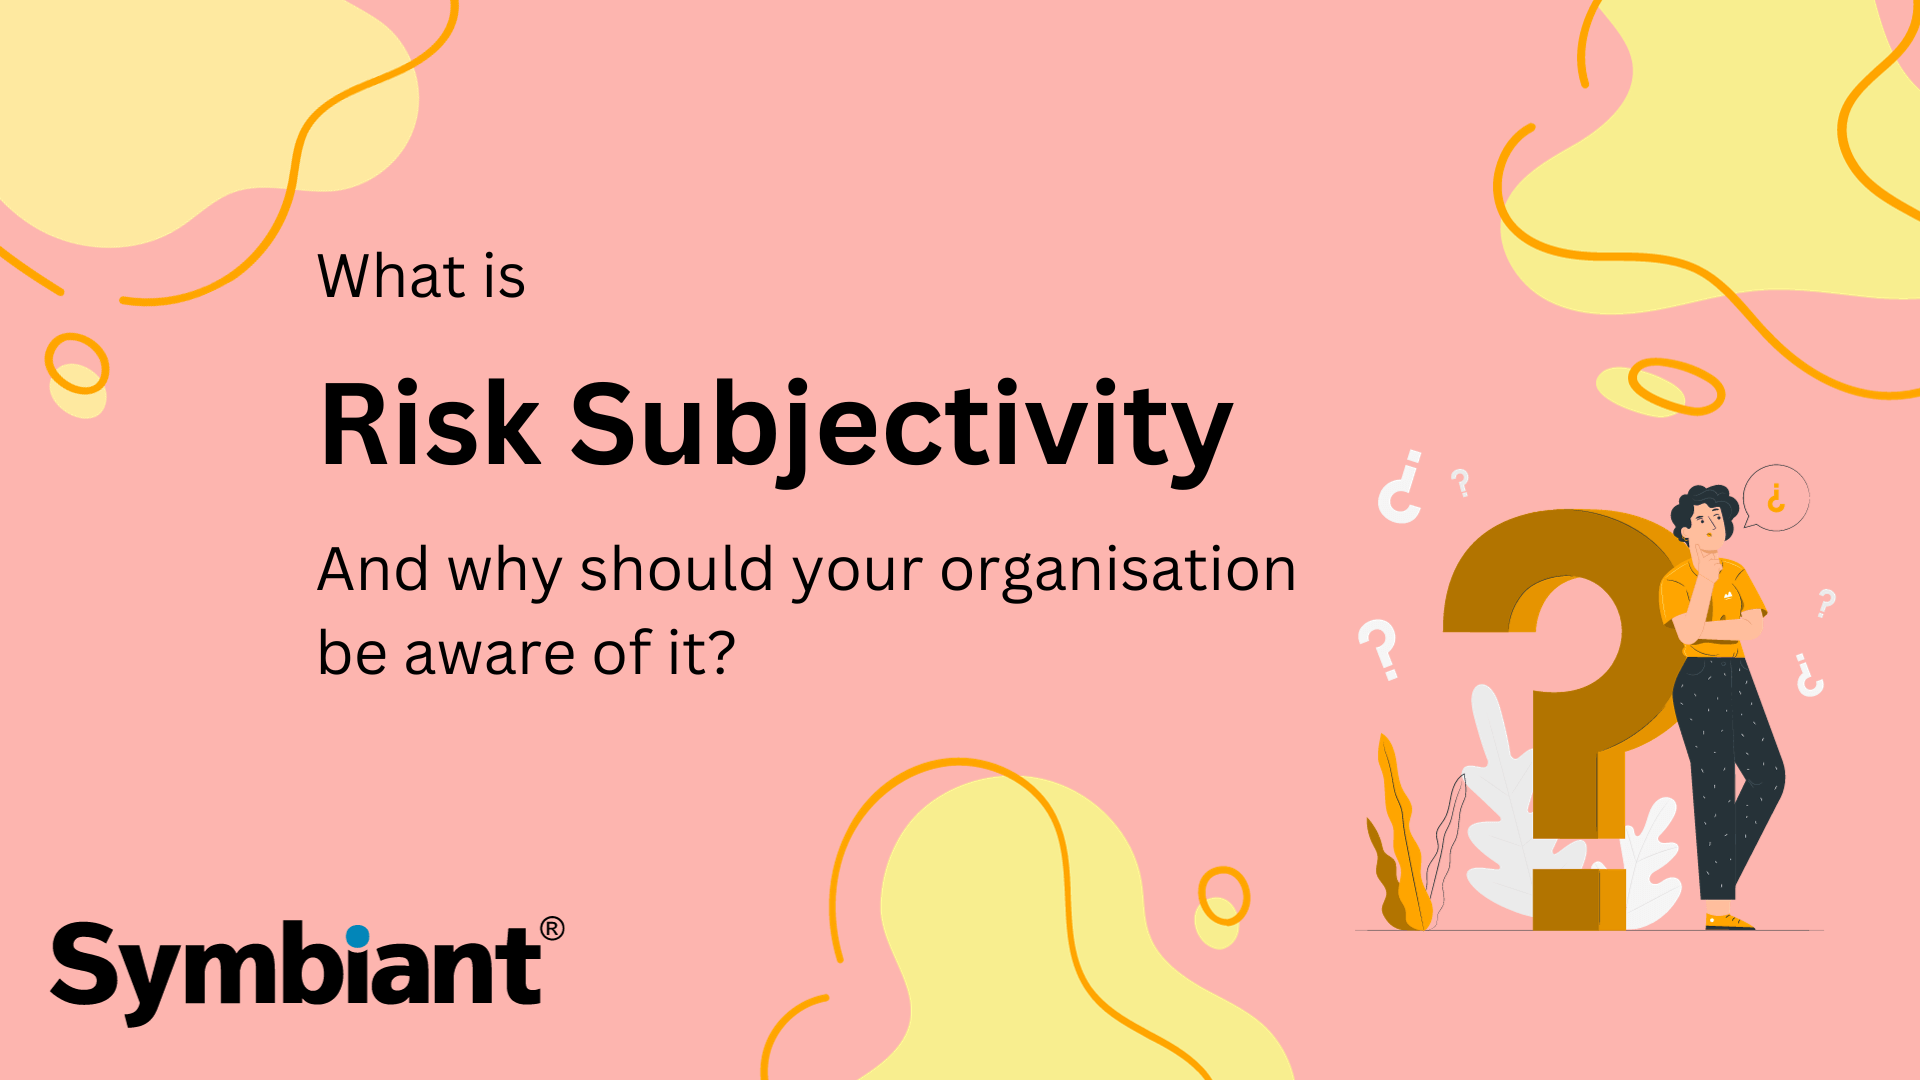 What is Risk Subjectivity and why should your organisation be aware of it?